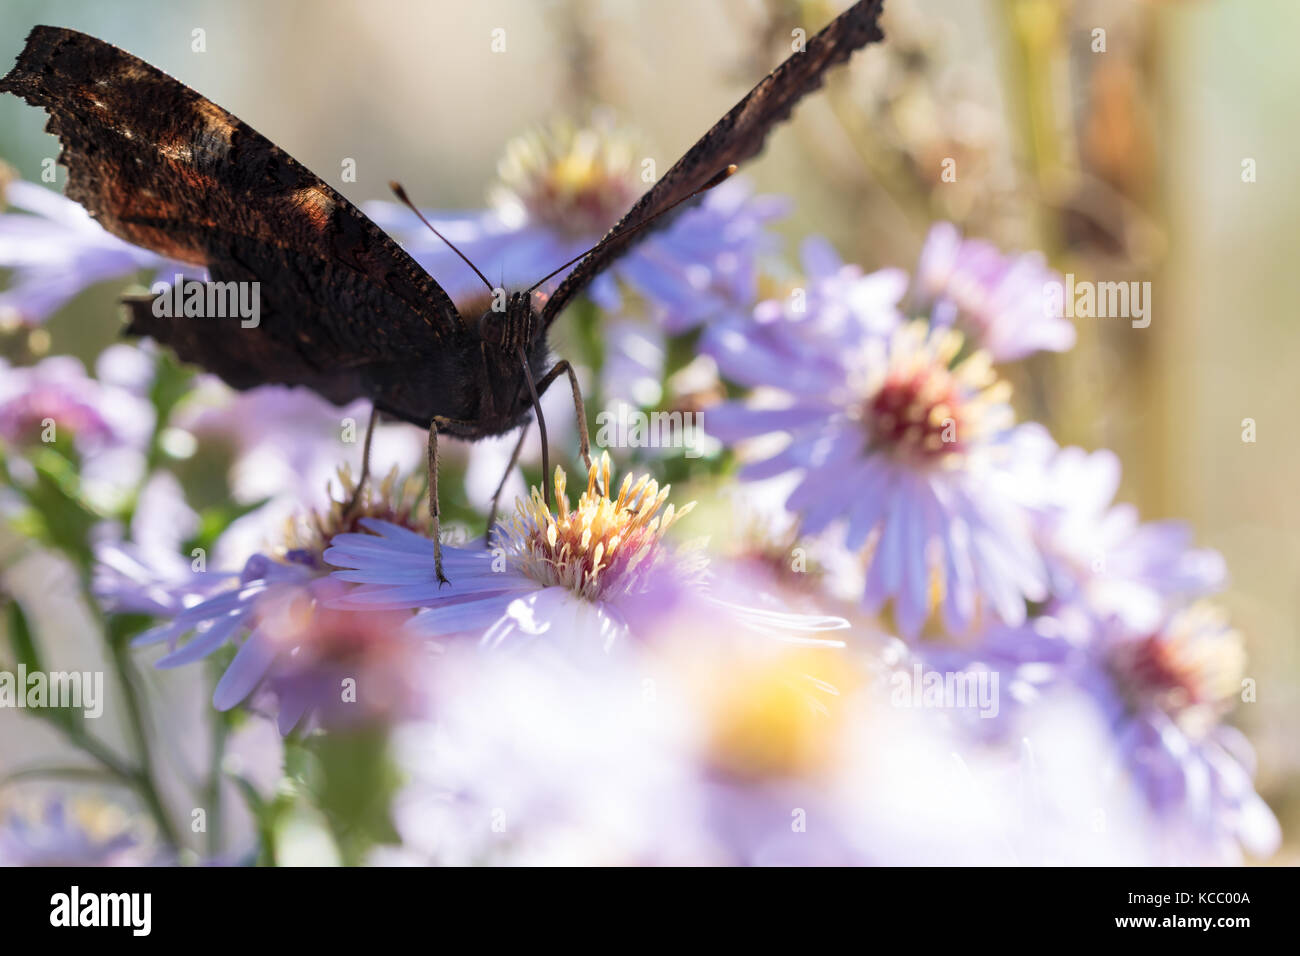 The peacock butterfly sitting on a flower (Aster amellus) and feeding on nectar. Also known as Aglais io, the European peacock. Close-up with selectiv Stock Photo